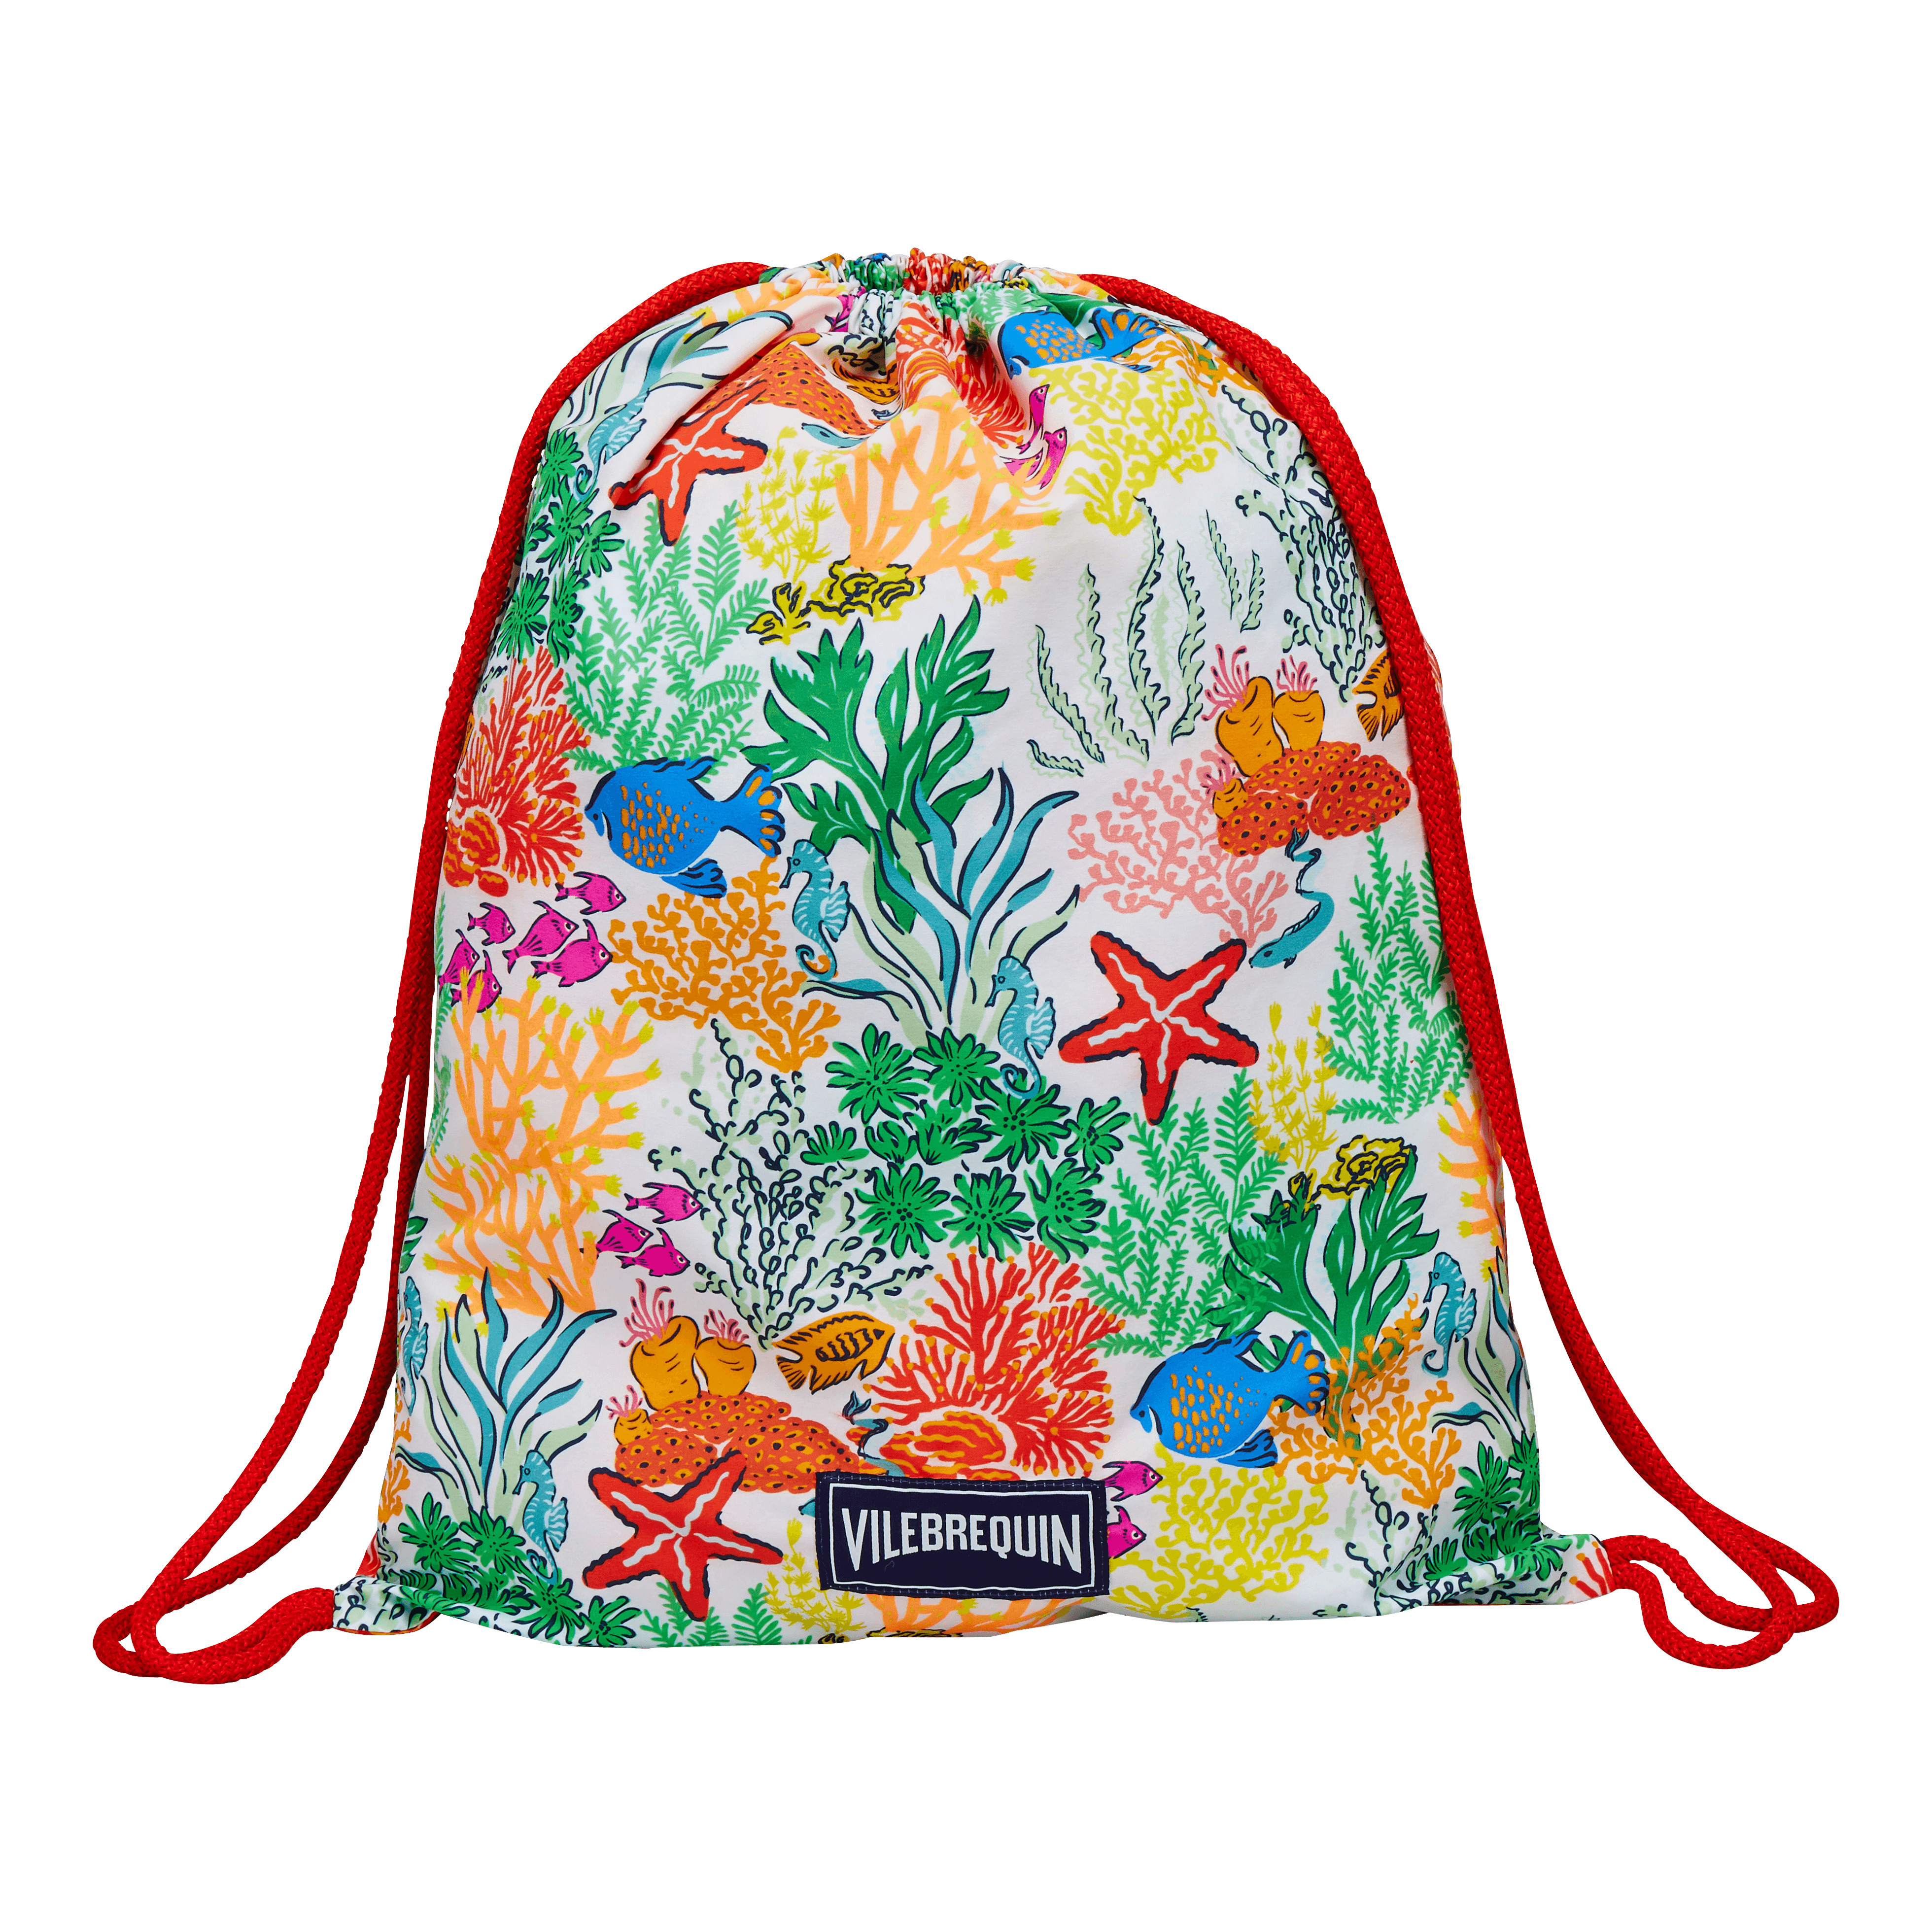 Kids Backpack Fonds Marins Multicolores - 1